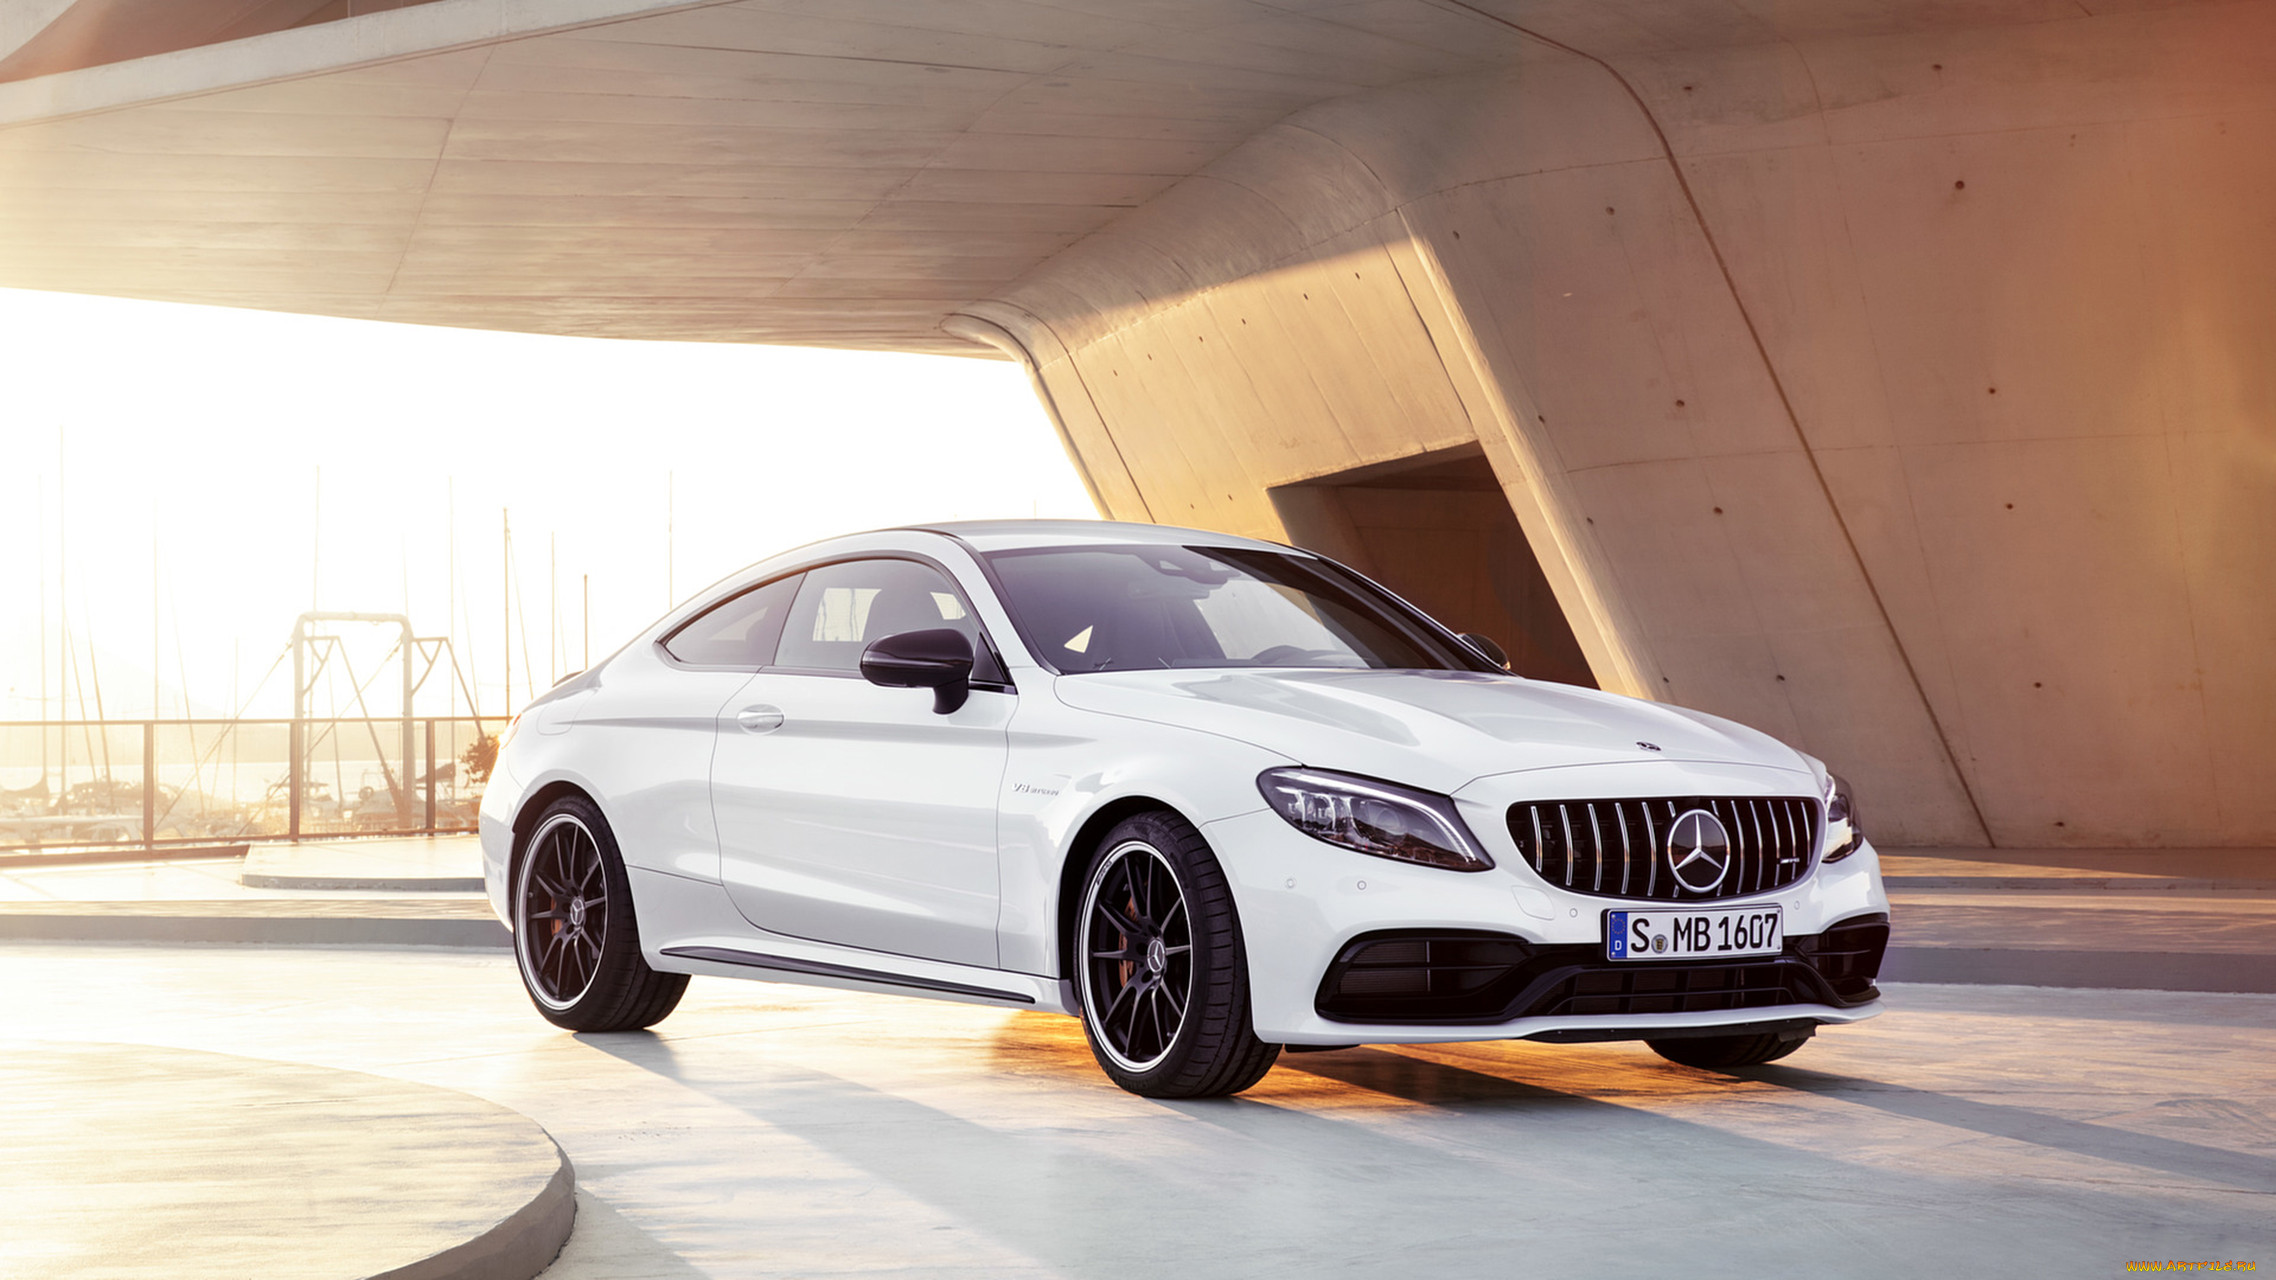 mercedes-benz amg c-63 s coupe 2019, , mercedes-benz, s, c-63, amg, , 2019, coupe